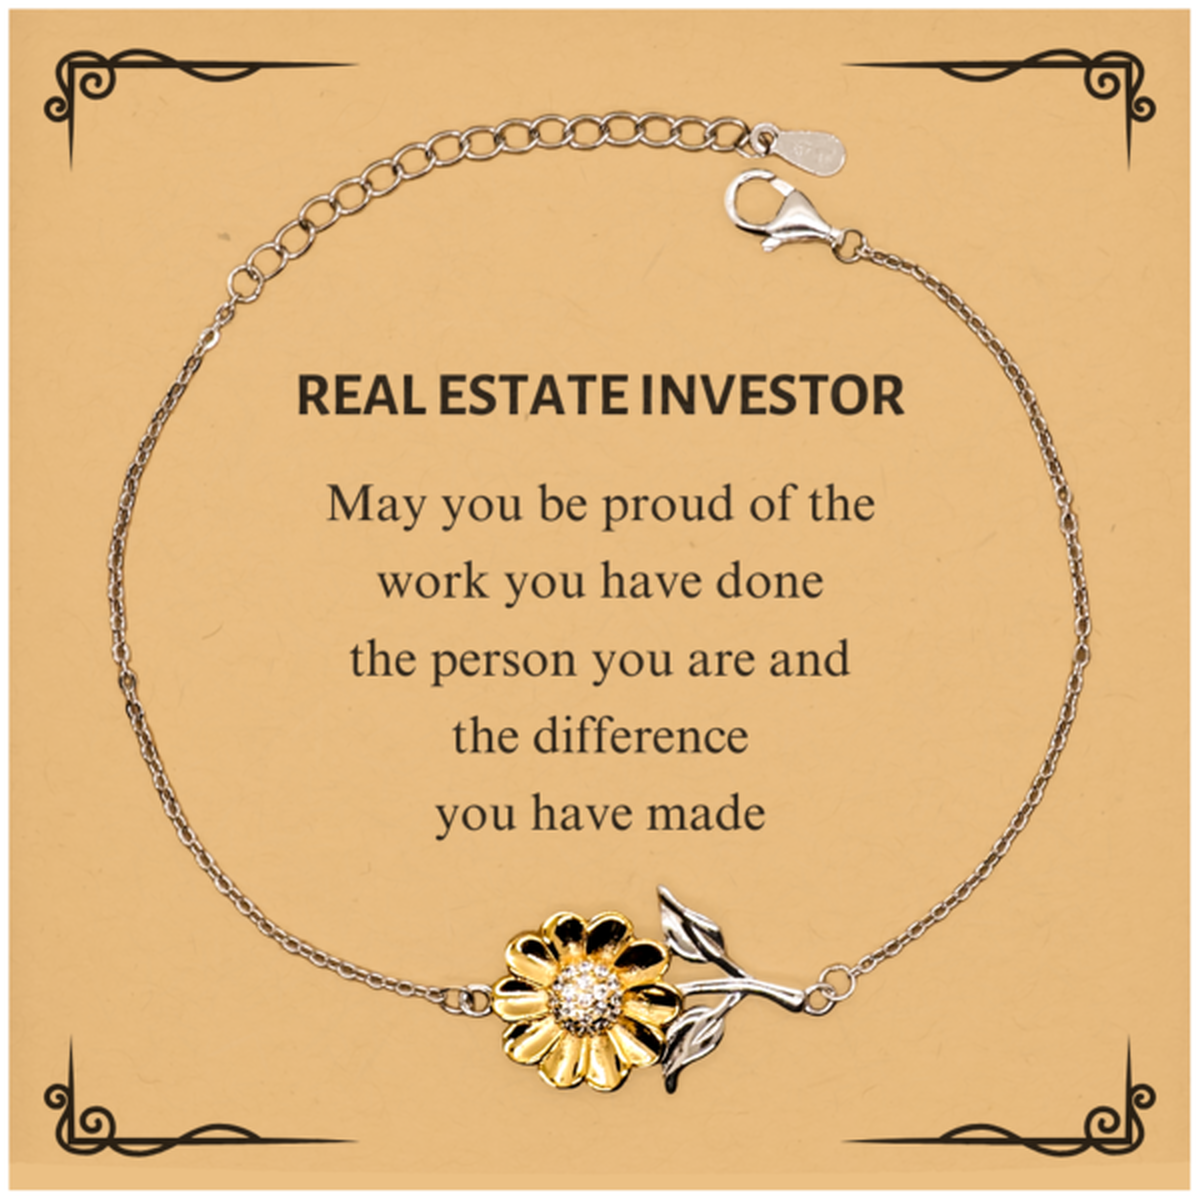 Real Estate Investor May you be proud of the work you have done, Retirement Real Estate Investor Sunflower Bracelet for Colleague Appreciation Gifts Amazing for Real Estate Investor